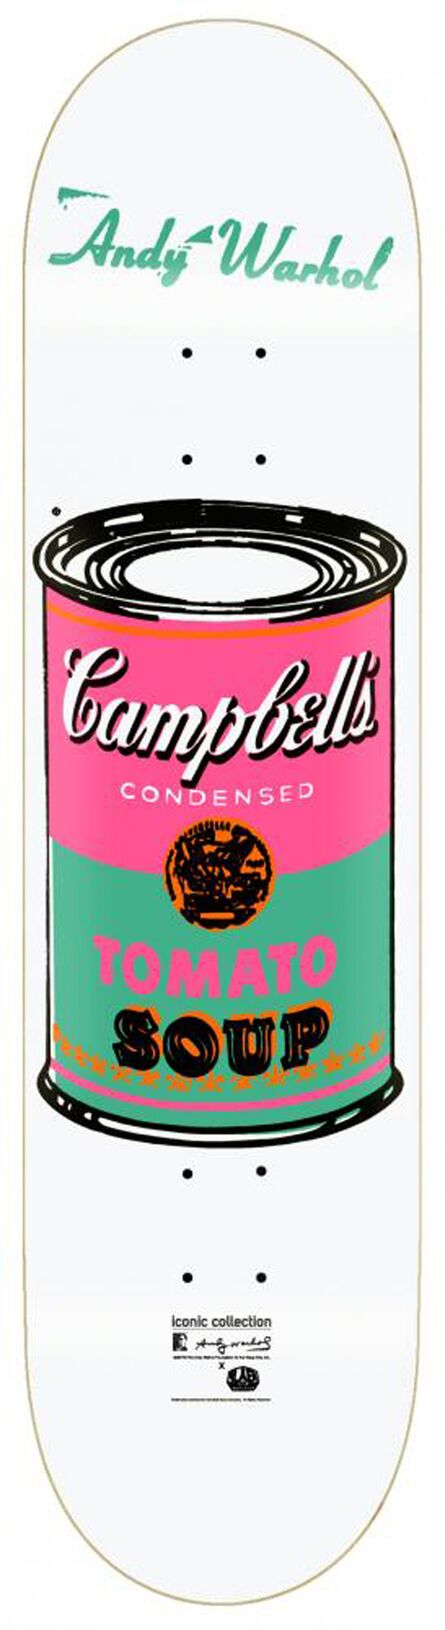 Andy Warhol, ‘Soup Can skateboard’, 2010